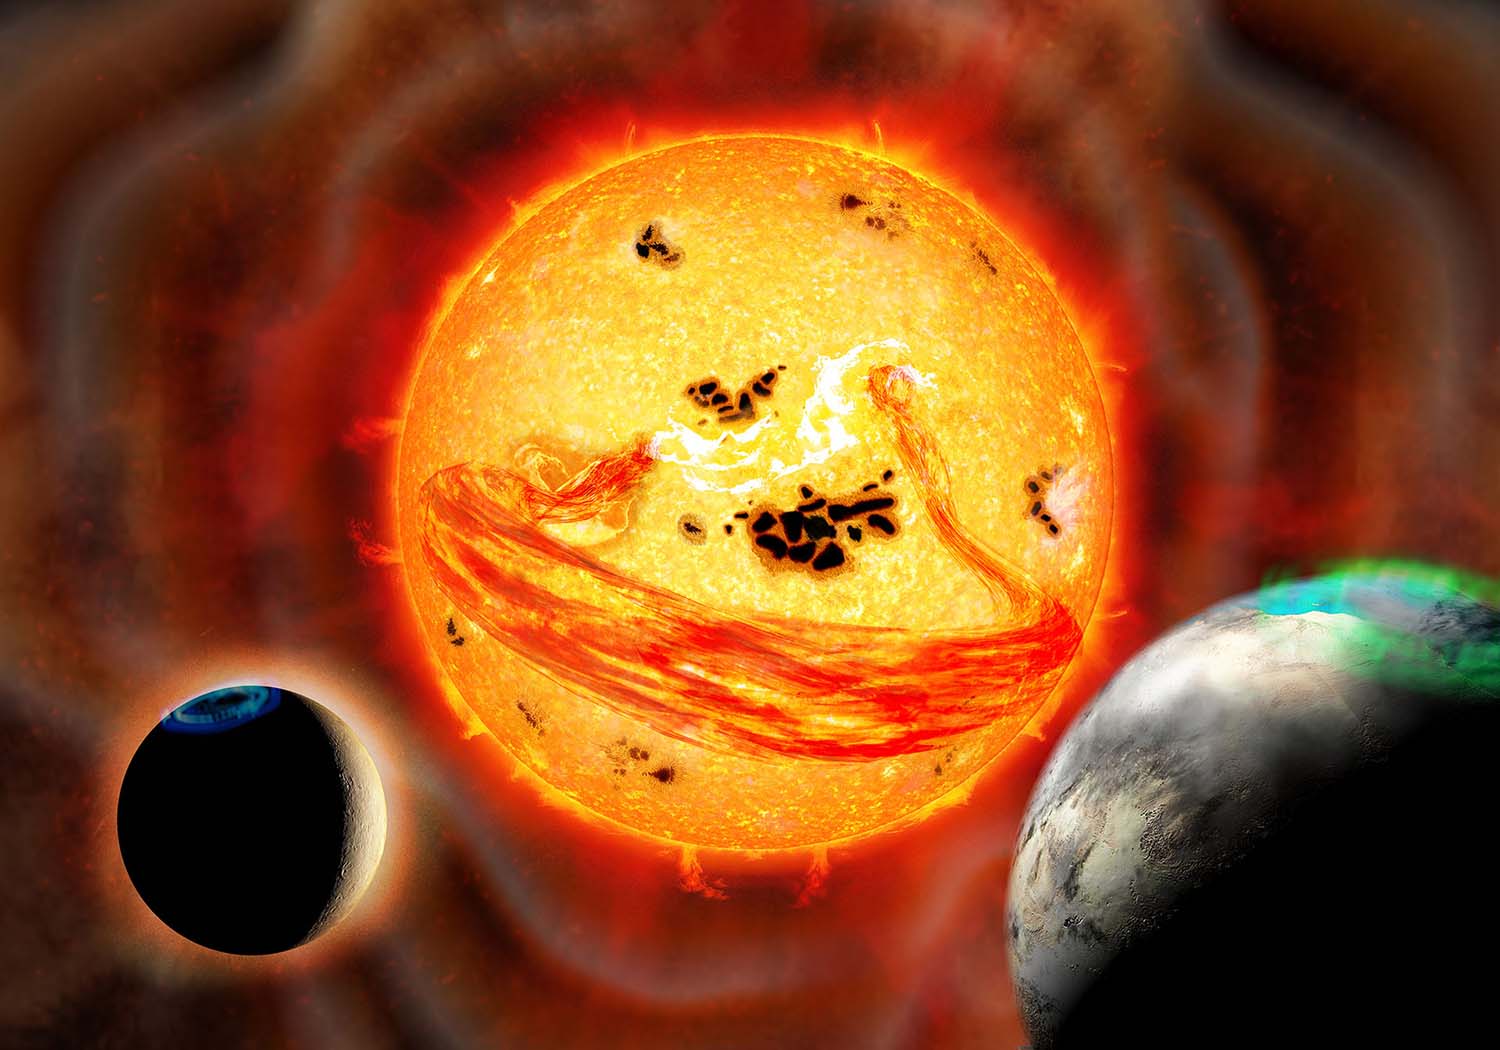 Artist rendering of a large coronal mass ejection on EK Draconis Credit: National Astronomical Observatory of Japan (NAOJ)